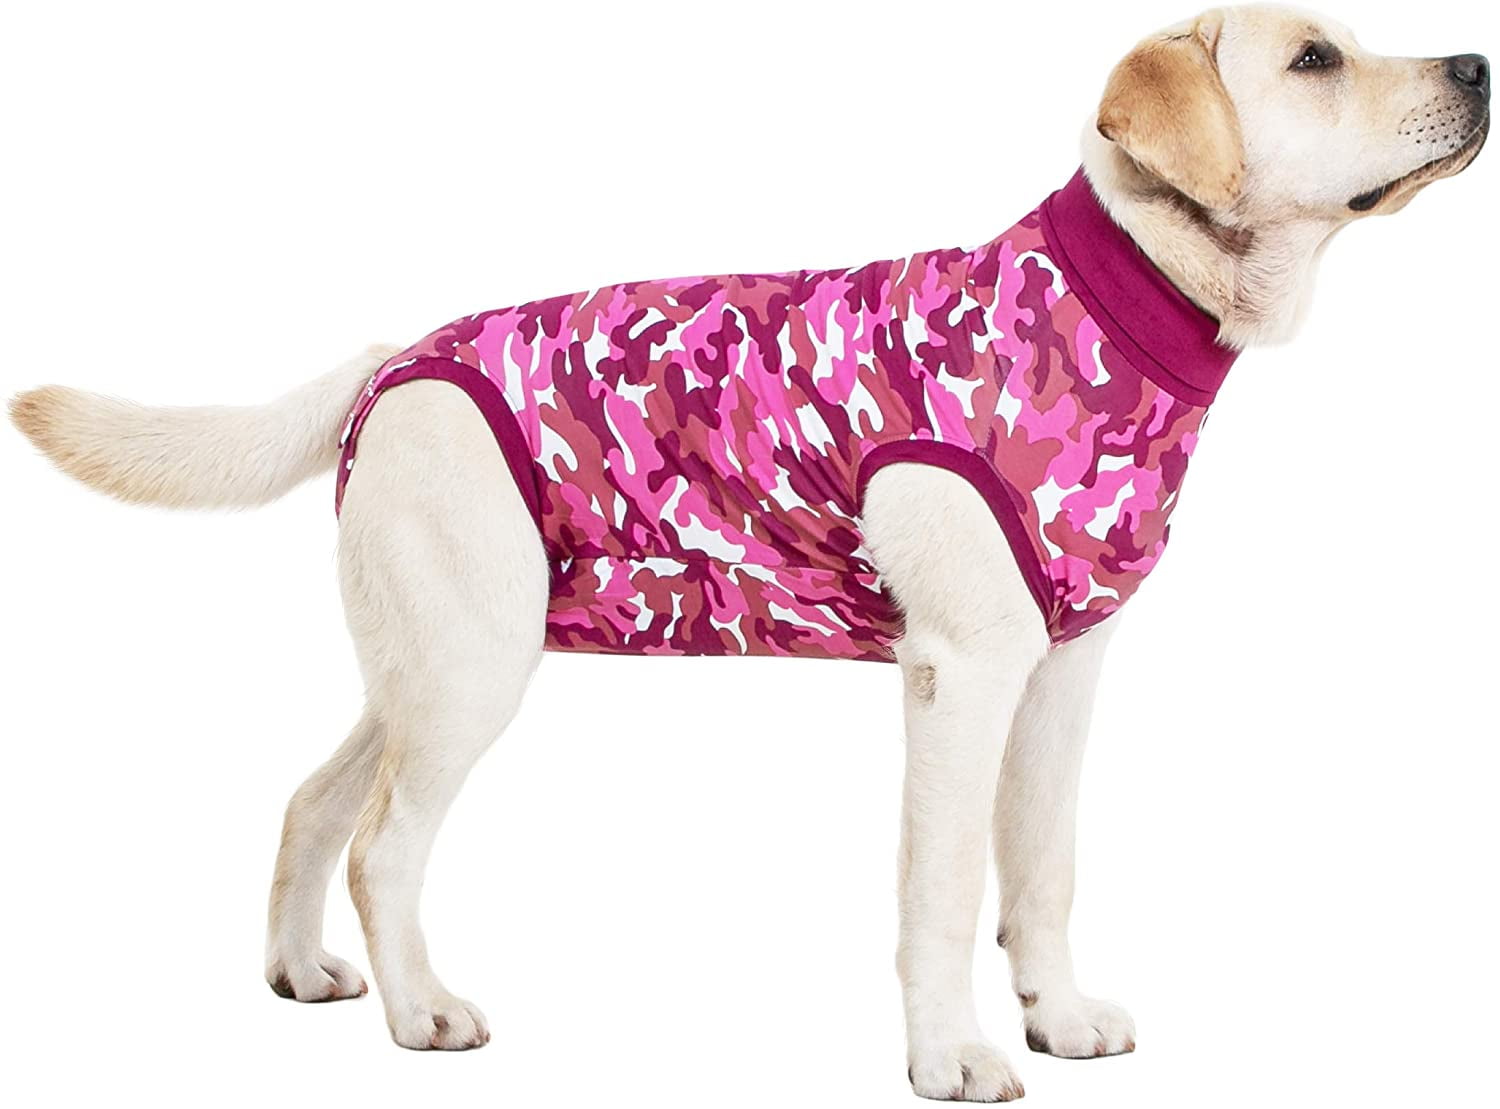 Southwind Dog Pajamas for Small Medium Dogs Dog Onesies Dog Surgical Recovery Suit for Cats Soft Cotton Puppy Rompers Dog Bodysuit Jumpsuit 4-Legged Clothes 